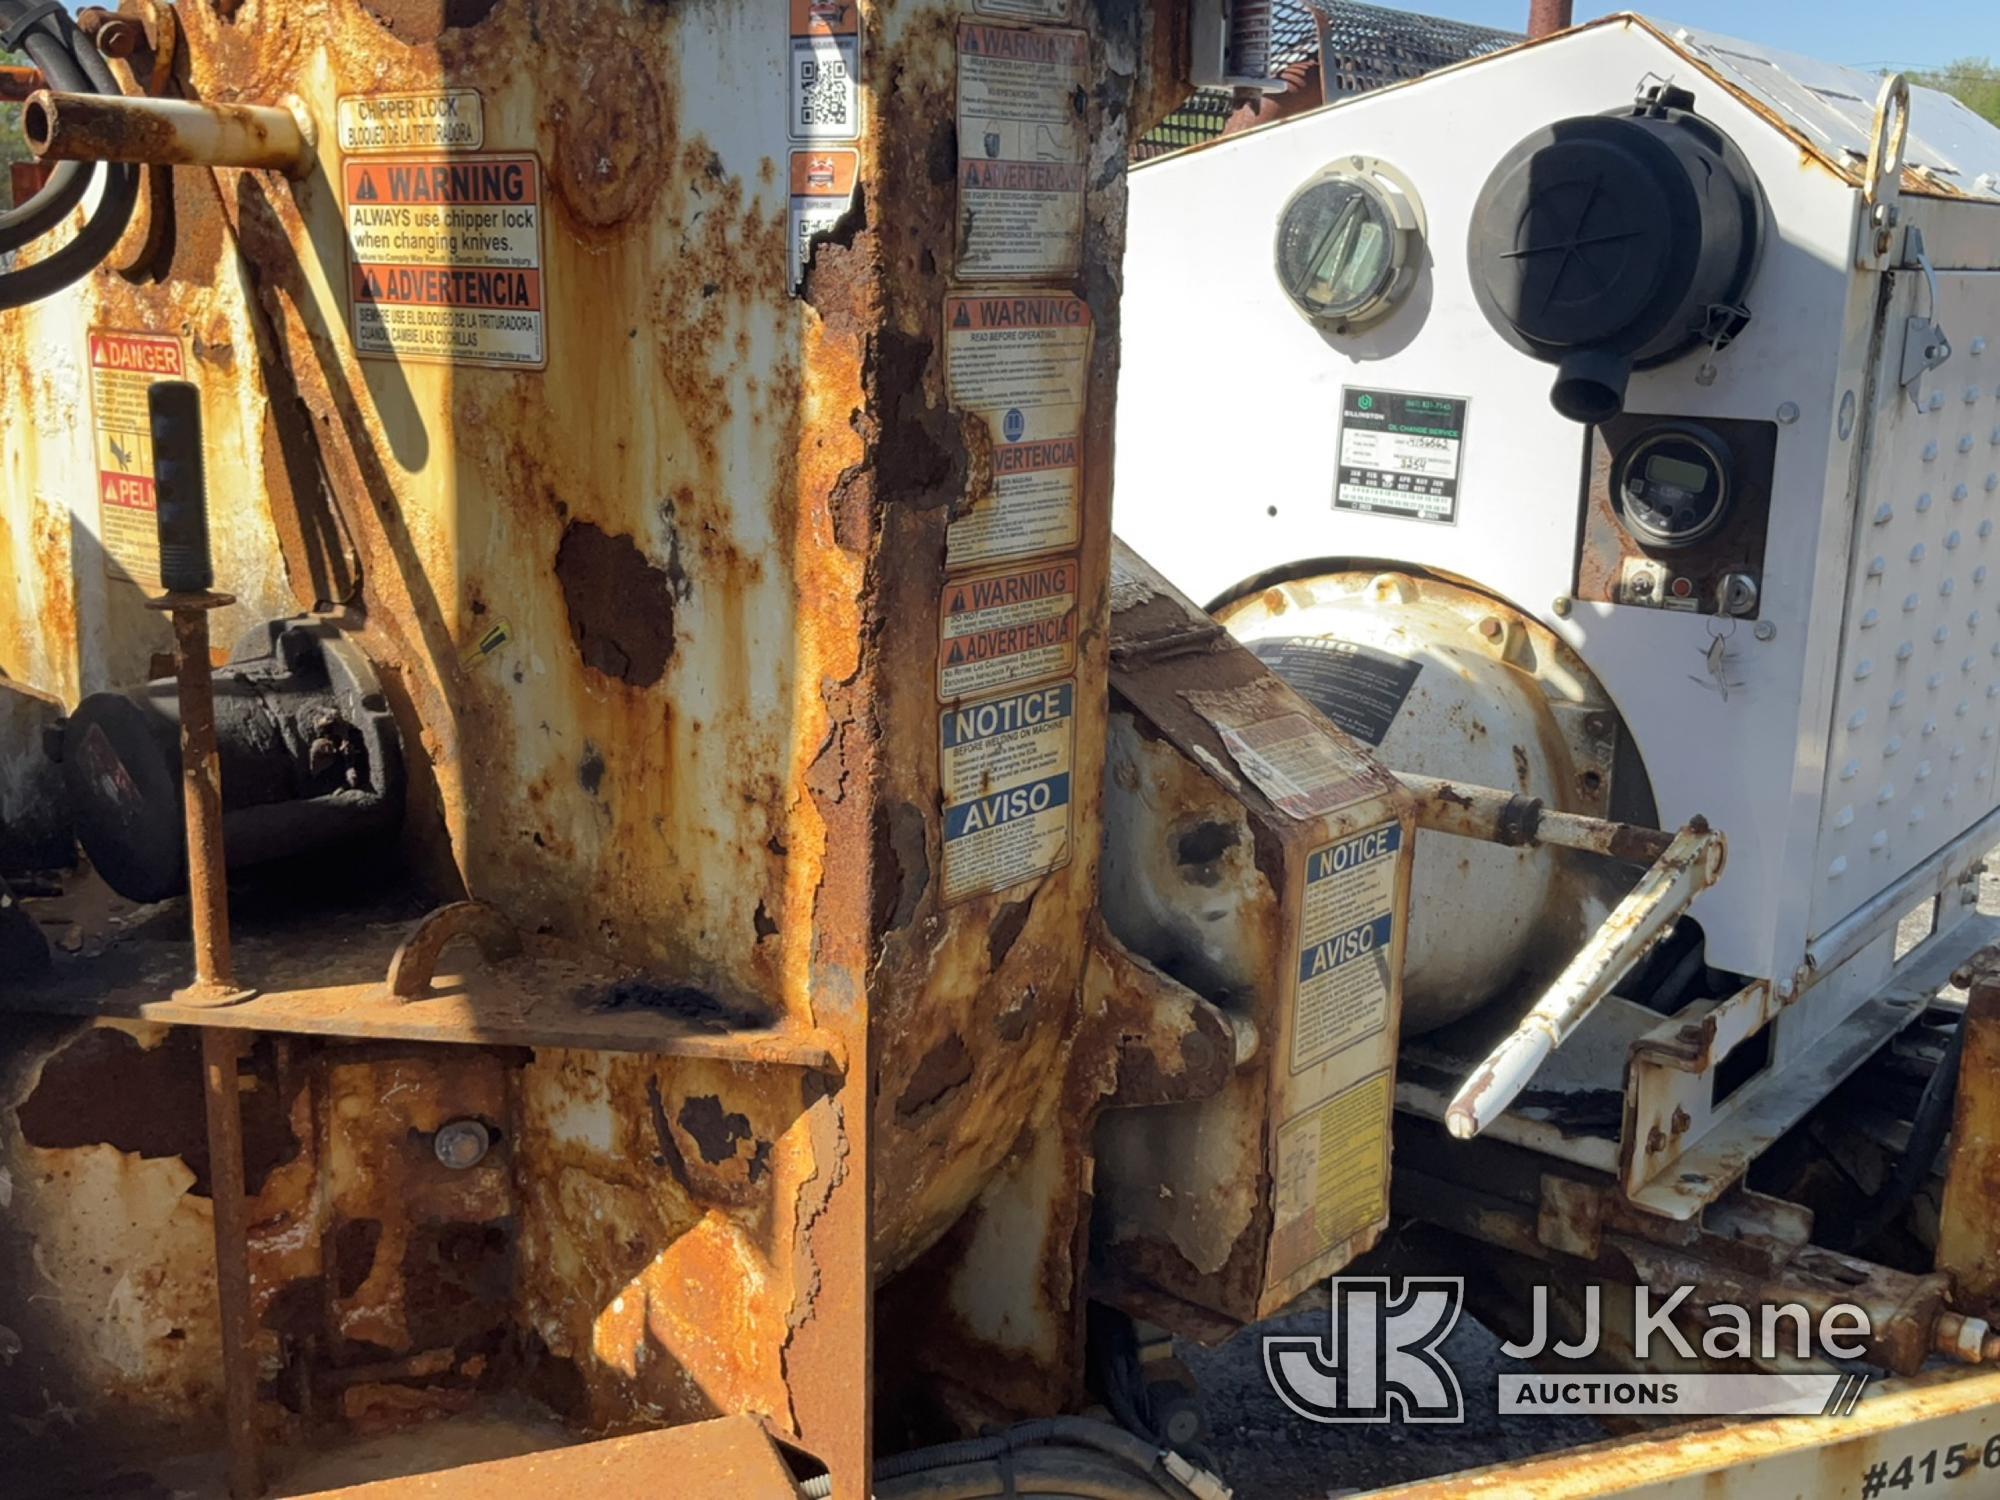 (Rome, NY) 2016 Morbark Beever M12D Chipper (12in Disc) No Title) (Bad Engine, Not Running, Conditio